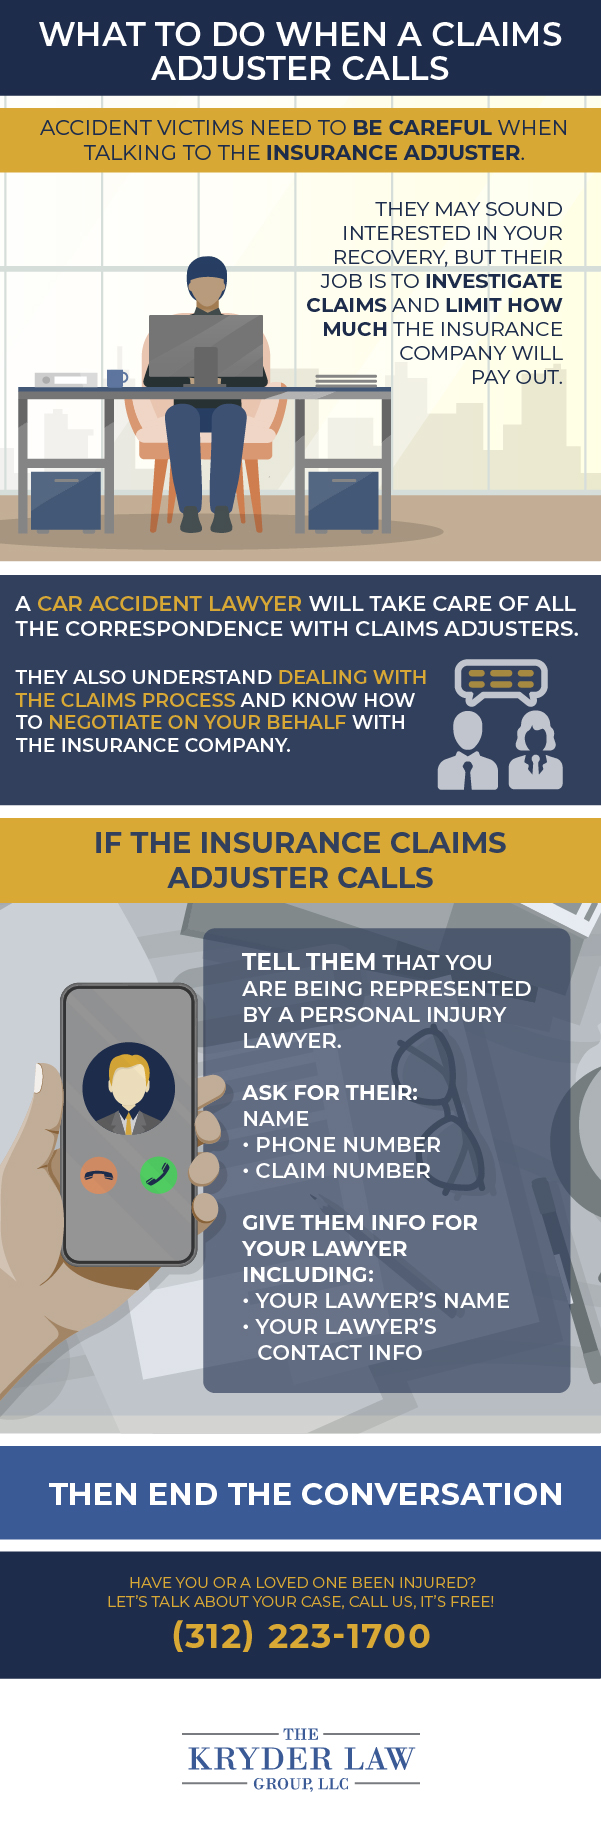 What You Should Do If a Claims Adjuster Calls After Your Accident Infographic